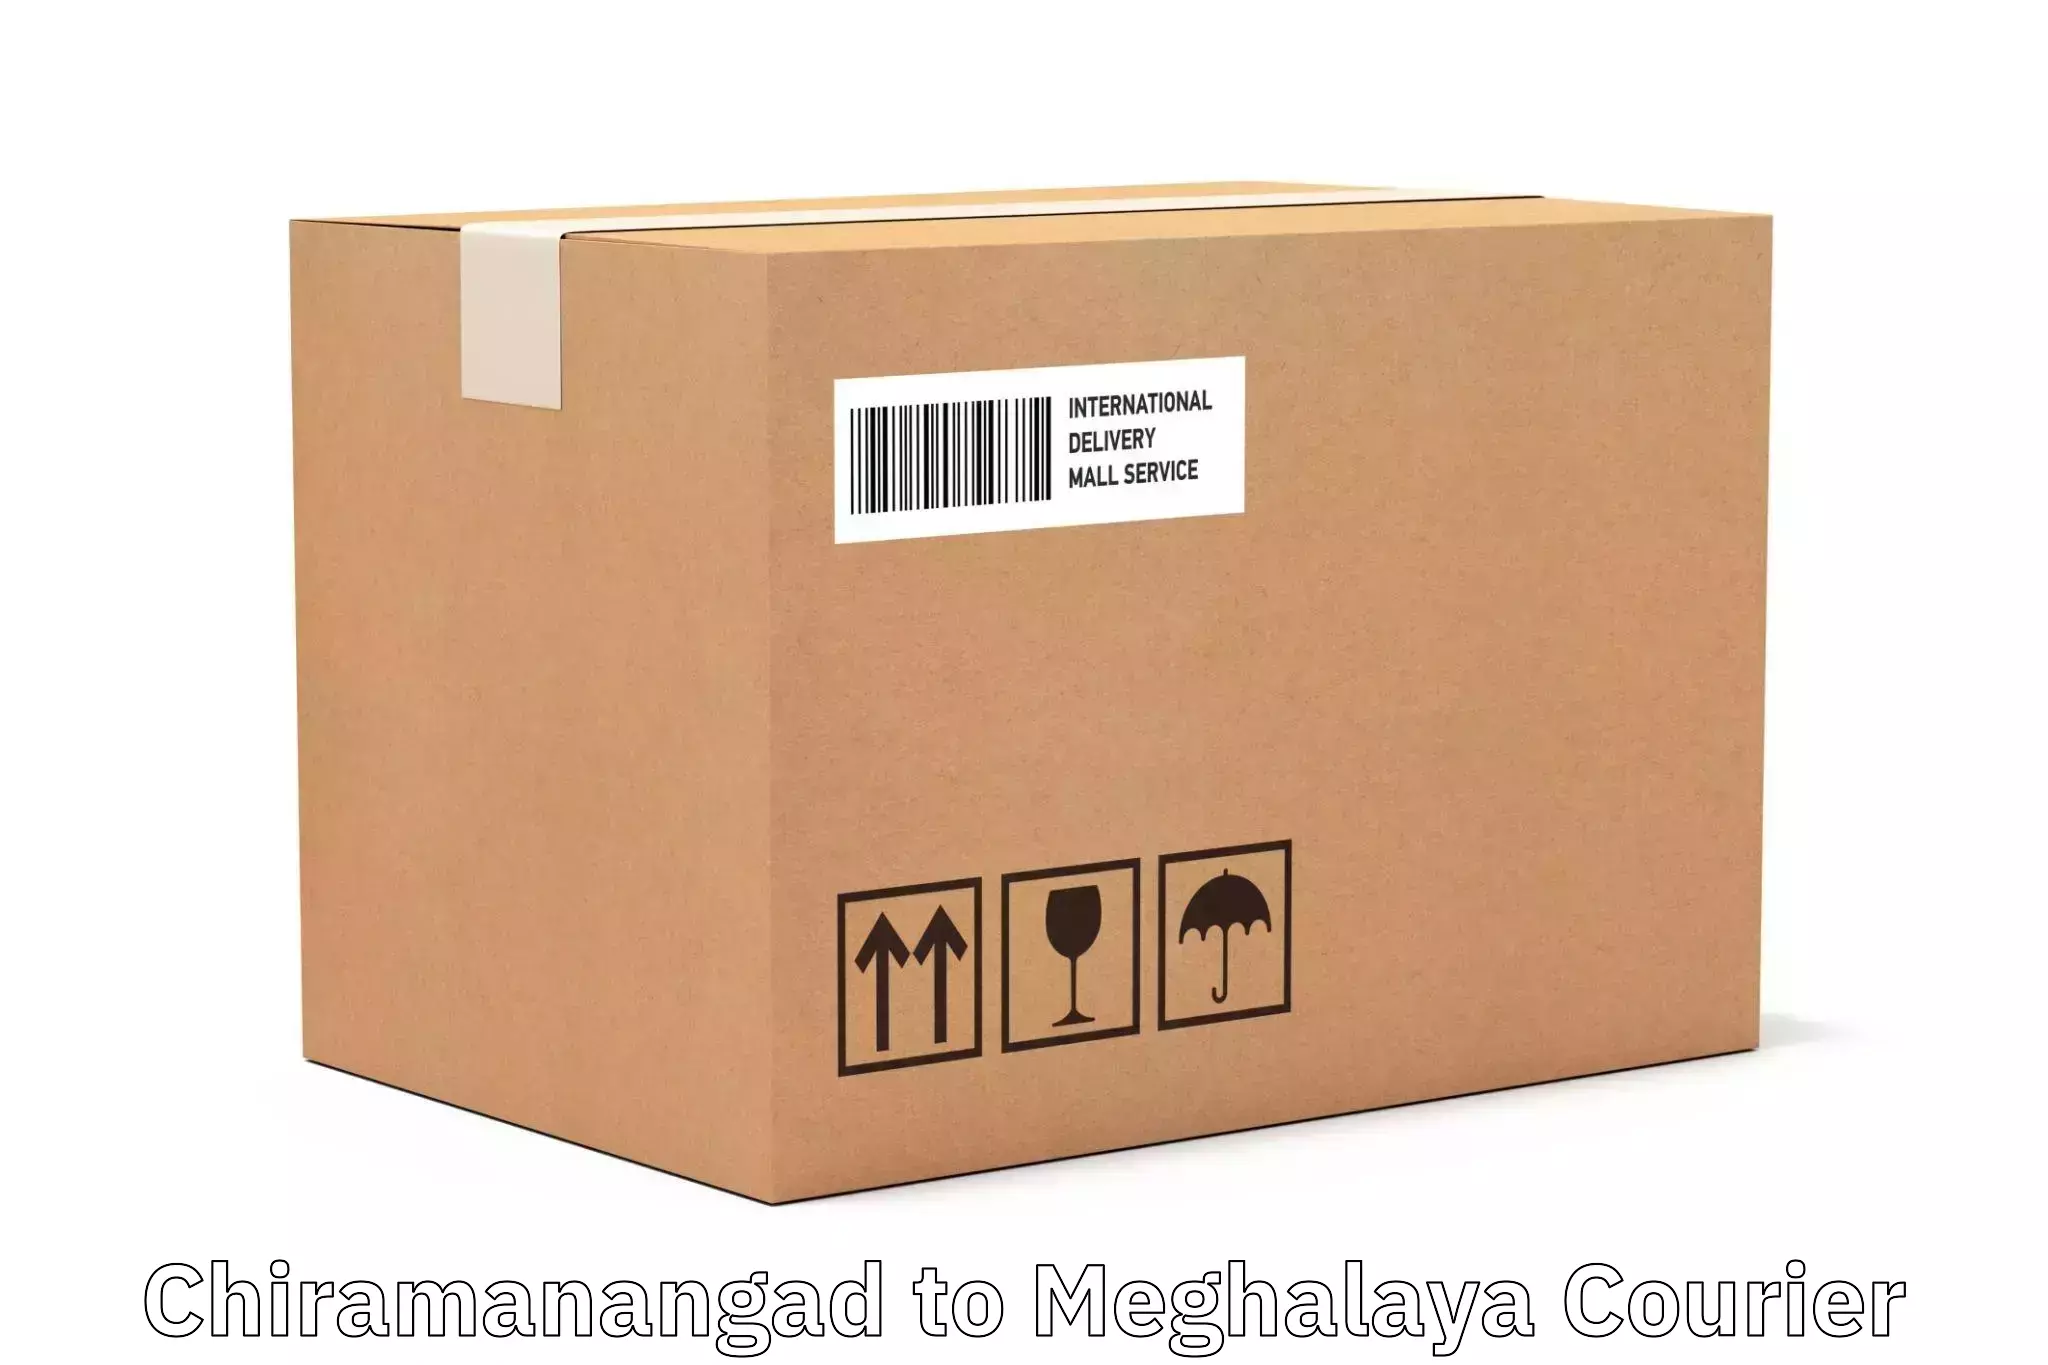 Same-day delivery solutions Chiramanangad to East Khasi Hills